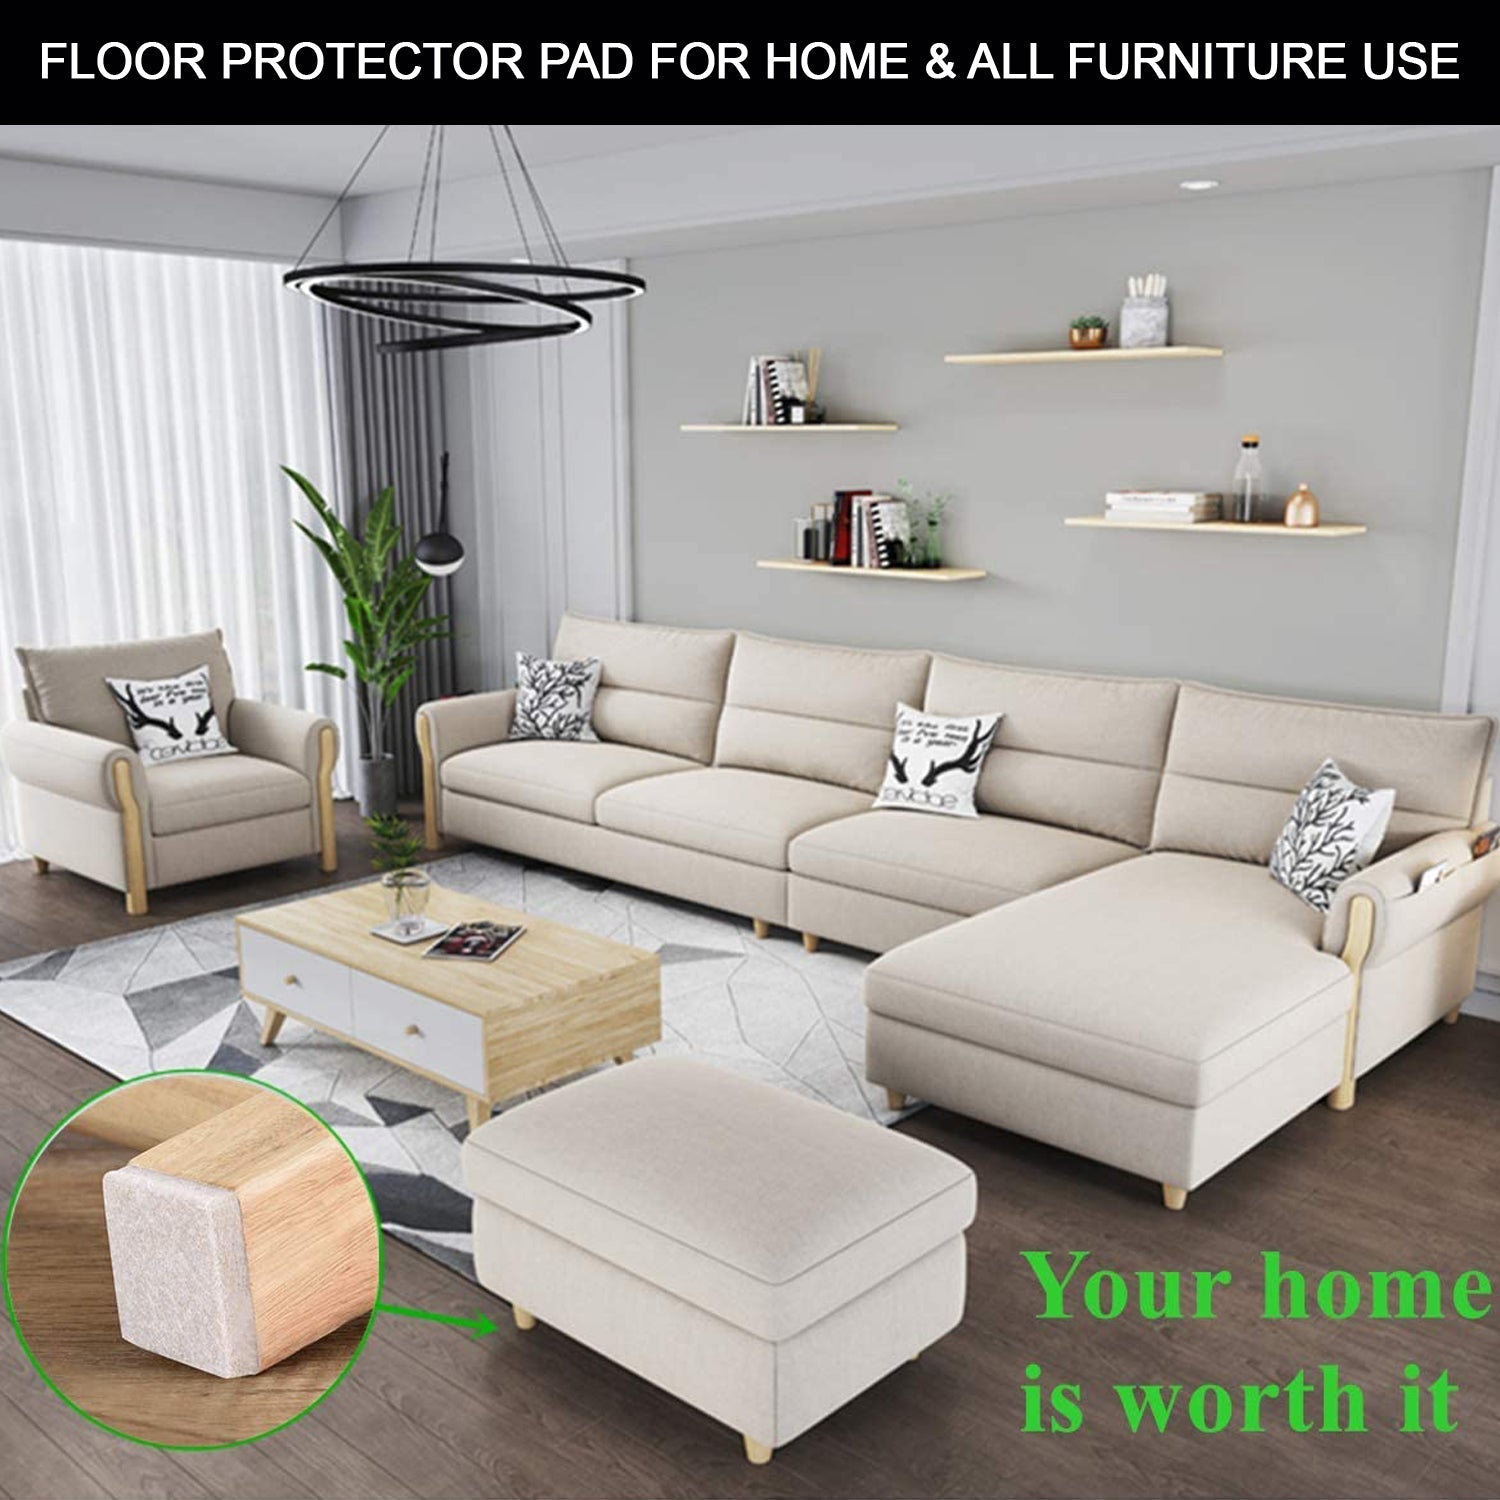 9050 FURNITURE PAD SQUARE FELT PADS FLOOR PROTECTOR PAD FOR HOME & ALL FURNITURE USE DeoDap